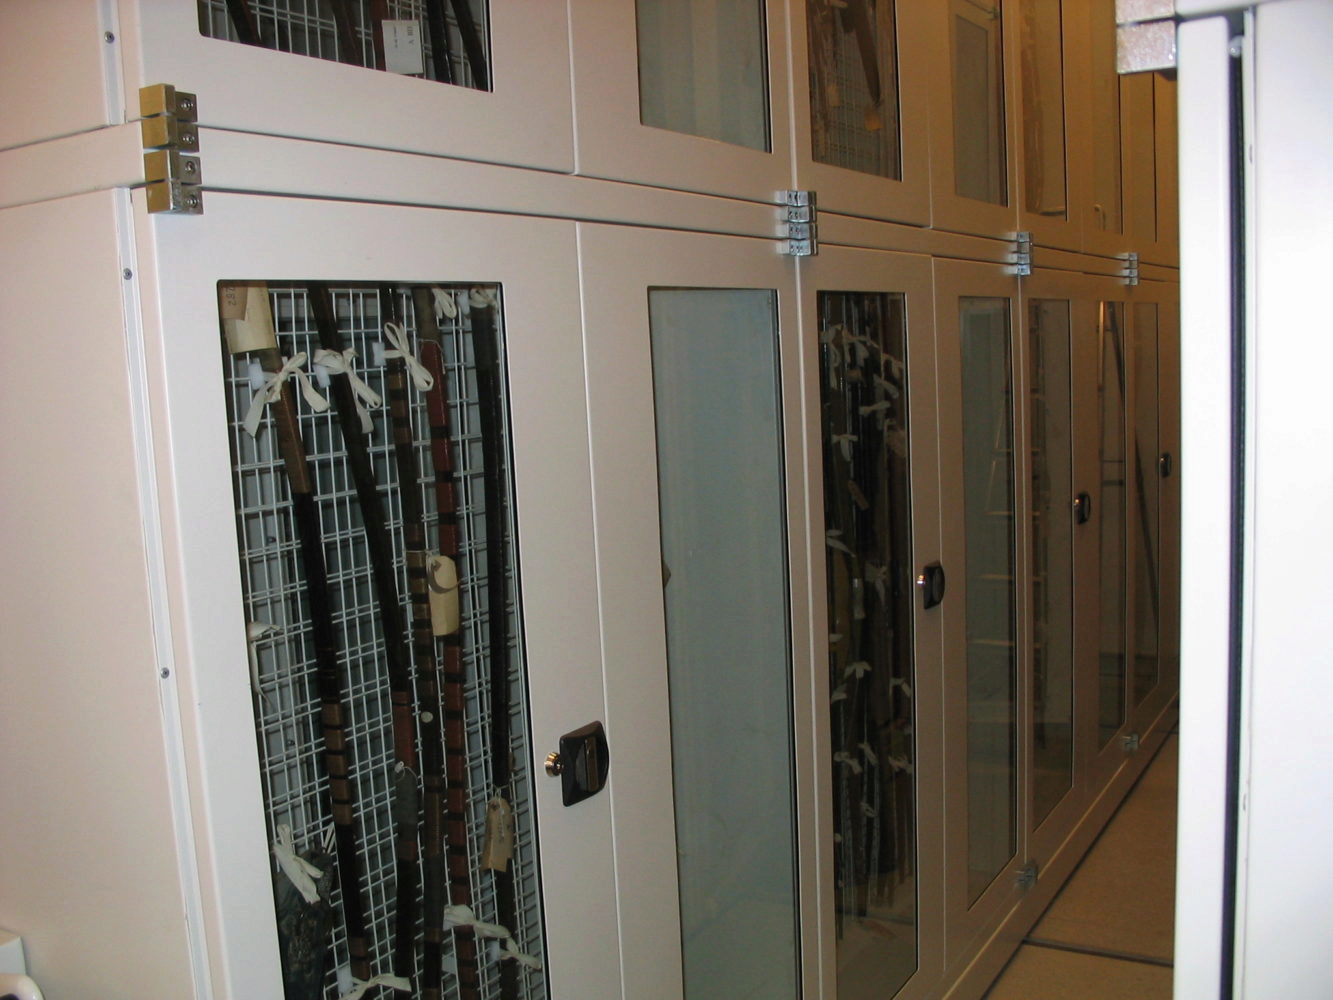 Offer you a range of storage systems that can be manually assisted or electronically controlled